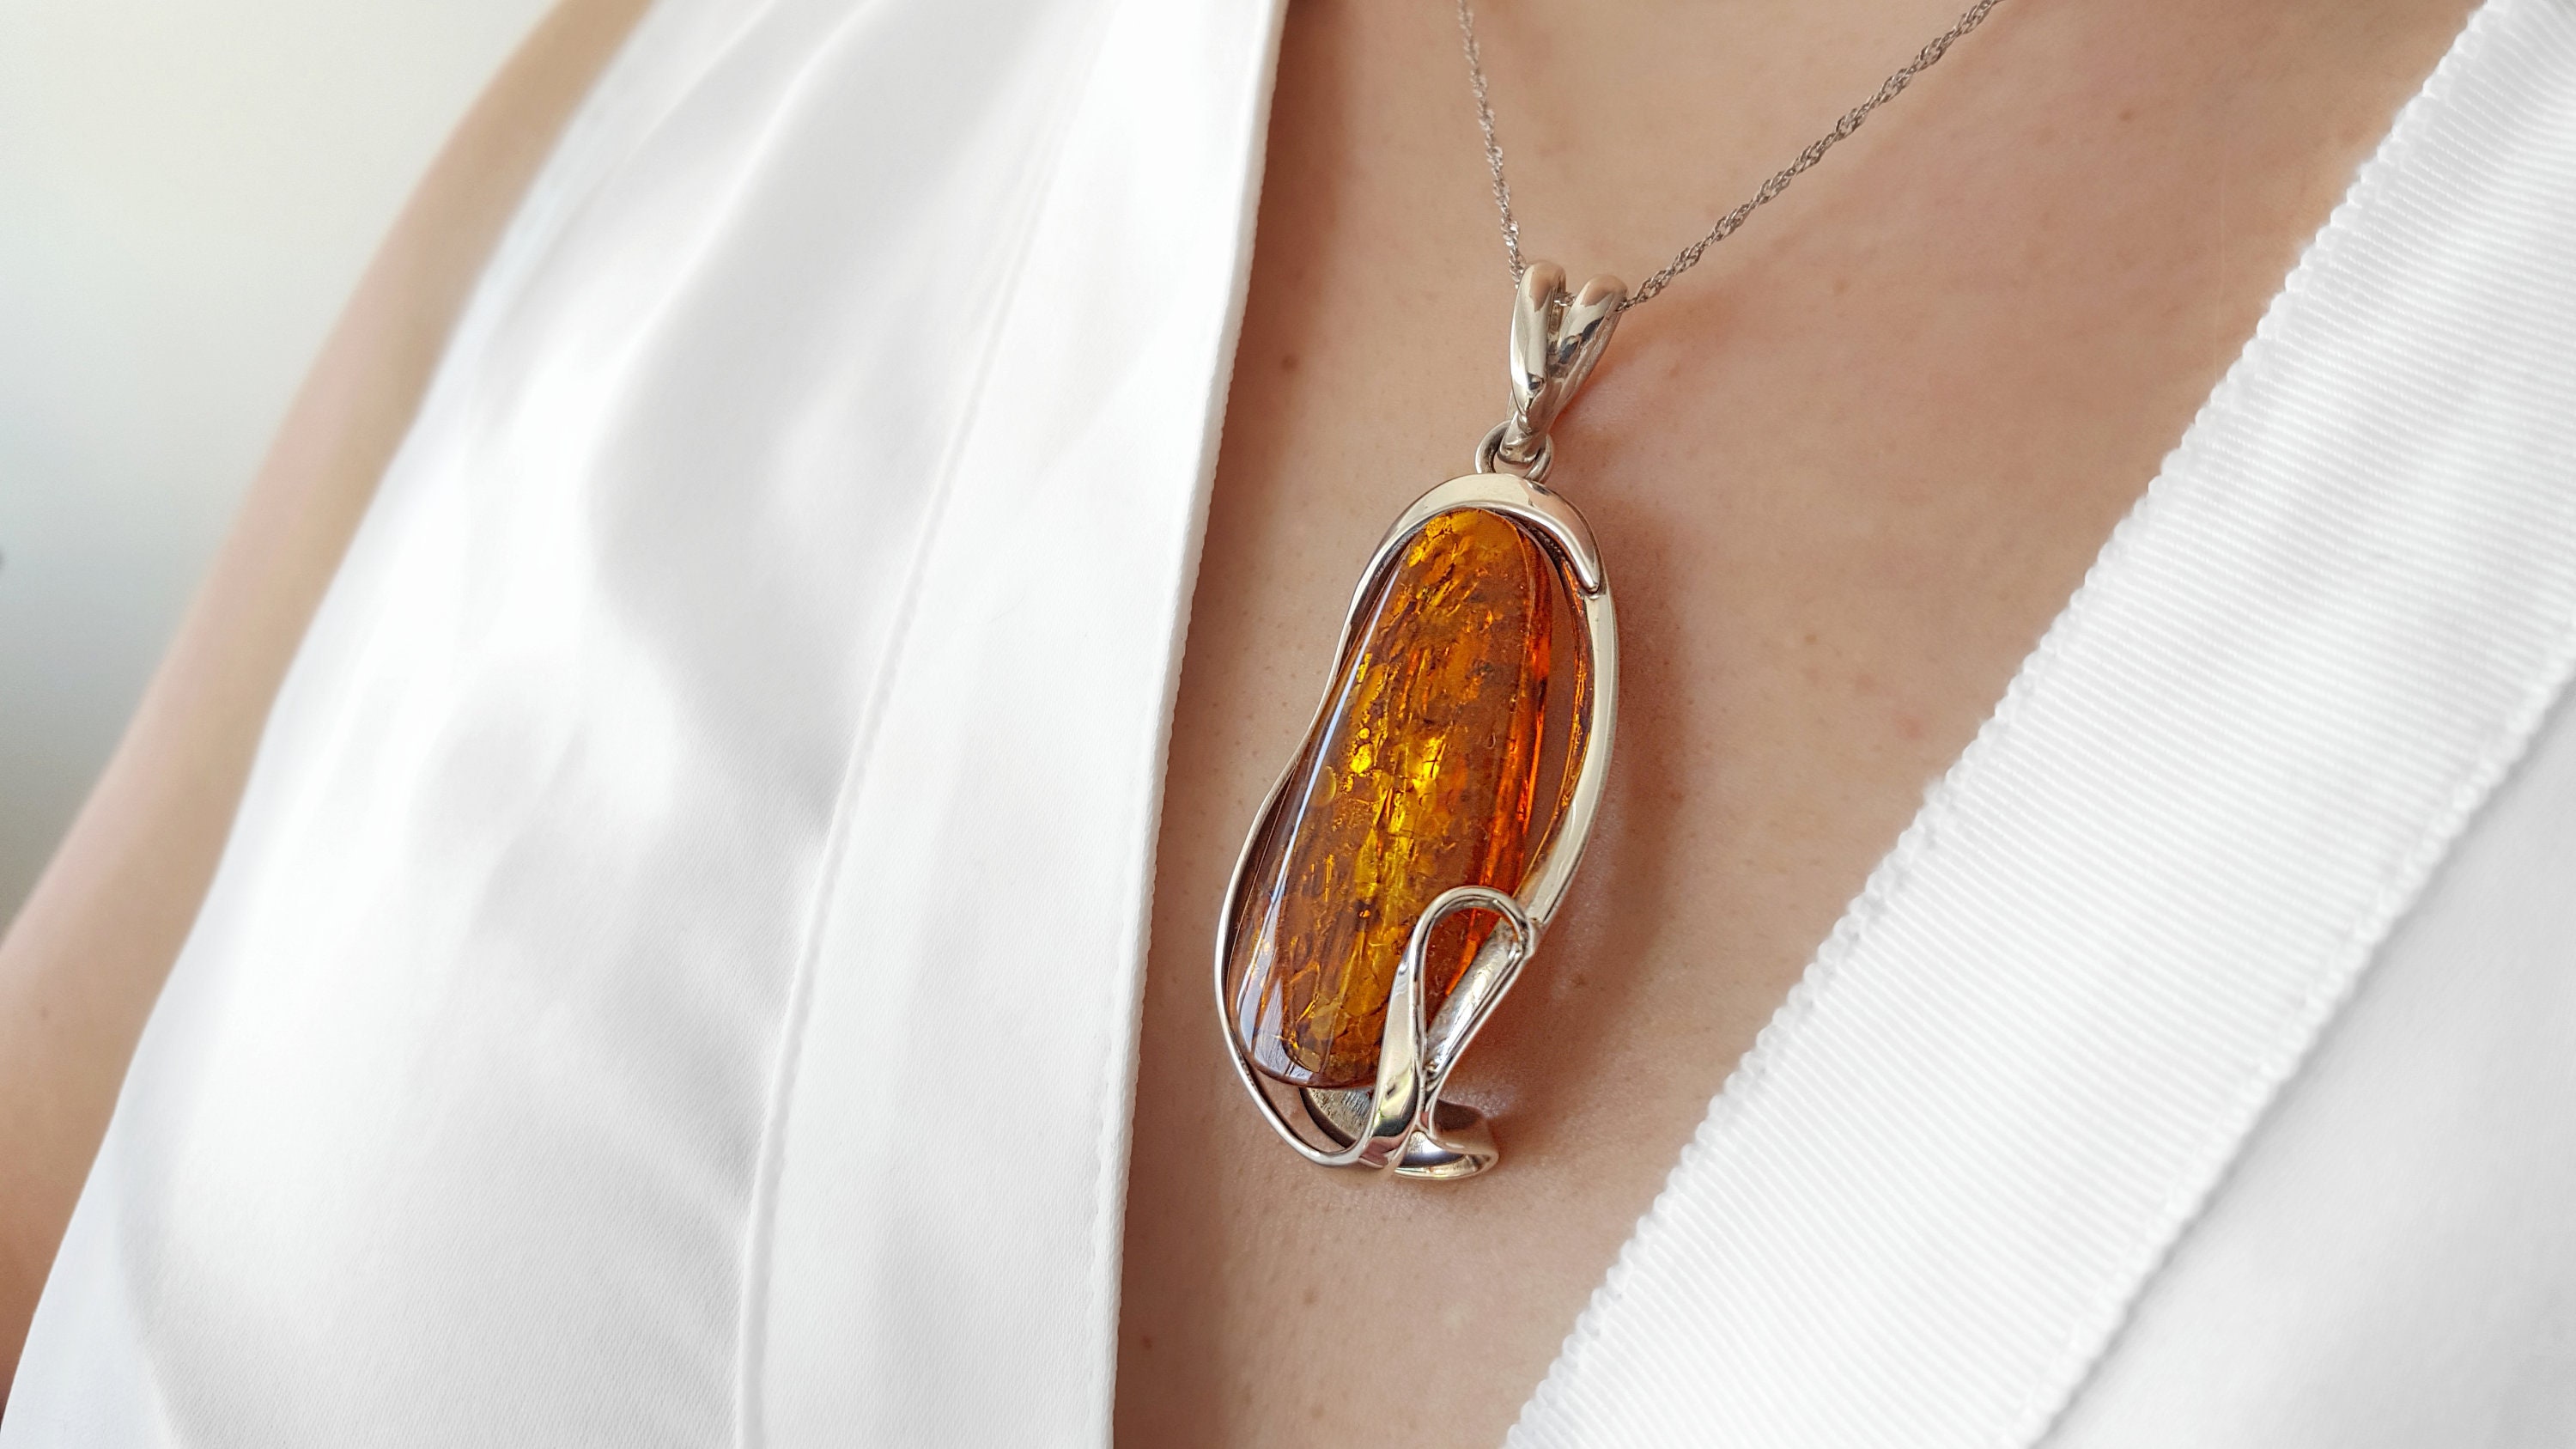 Large Baltic Amber Pendant Made of Genuine Amber.